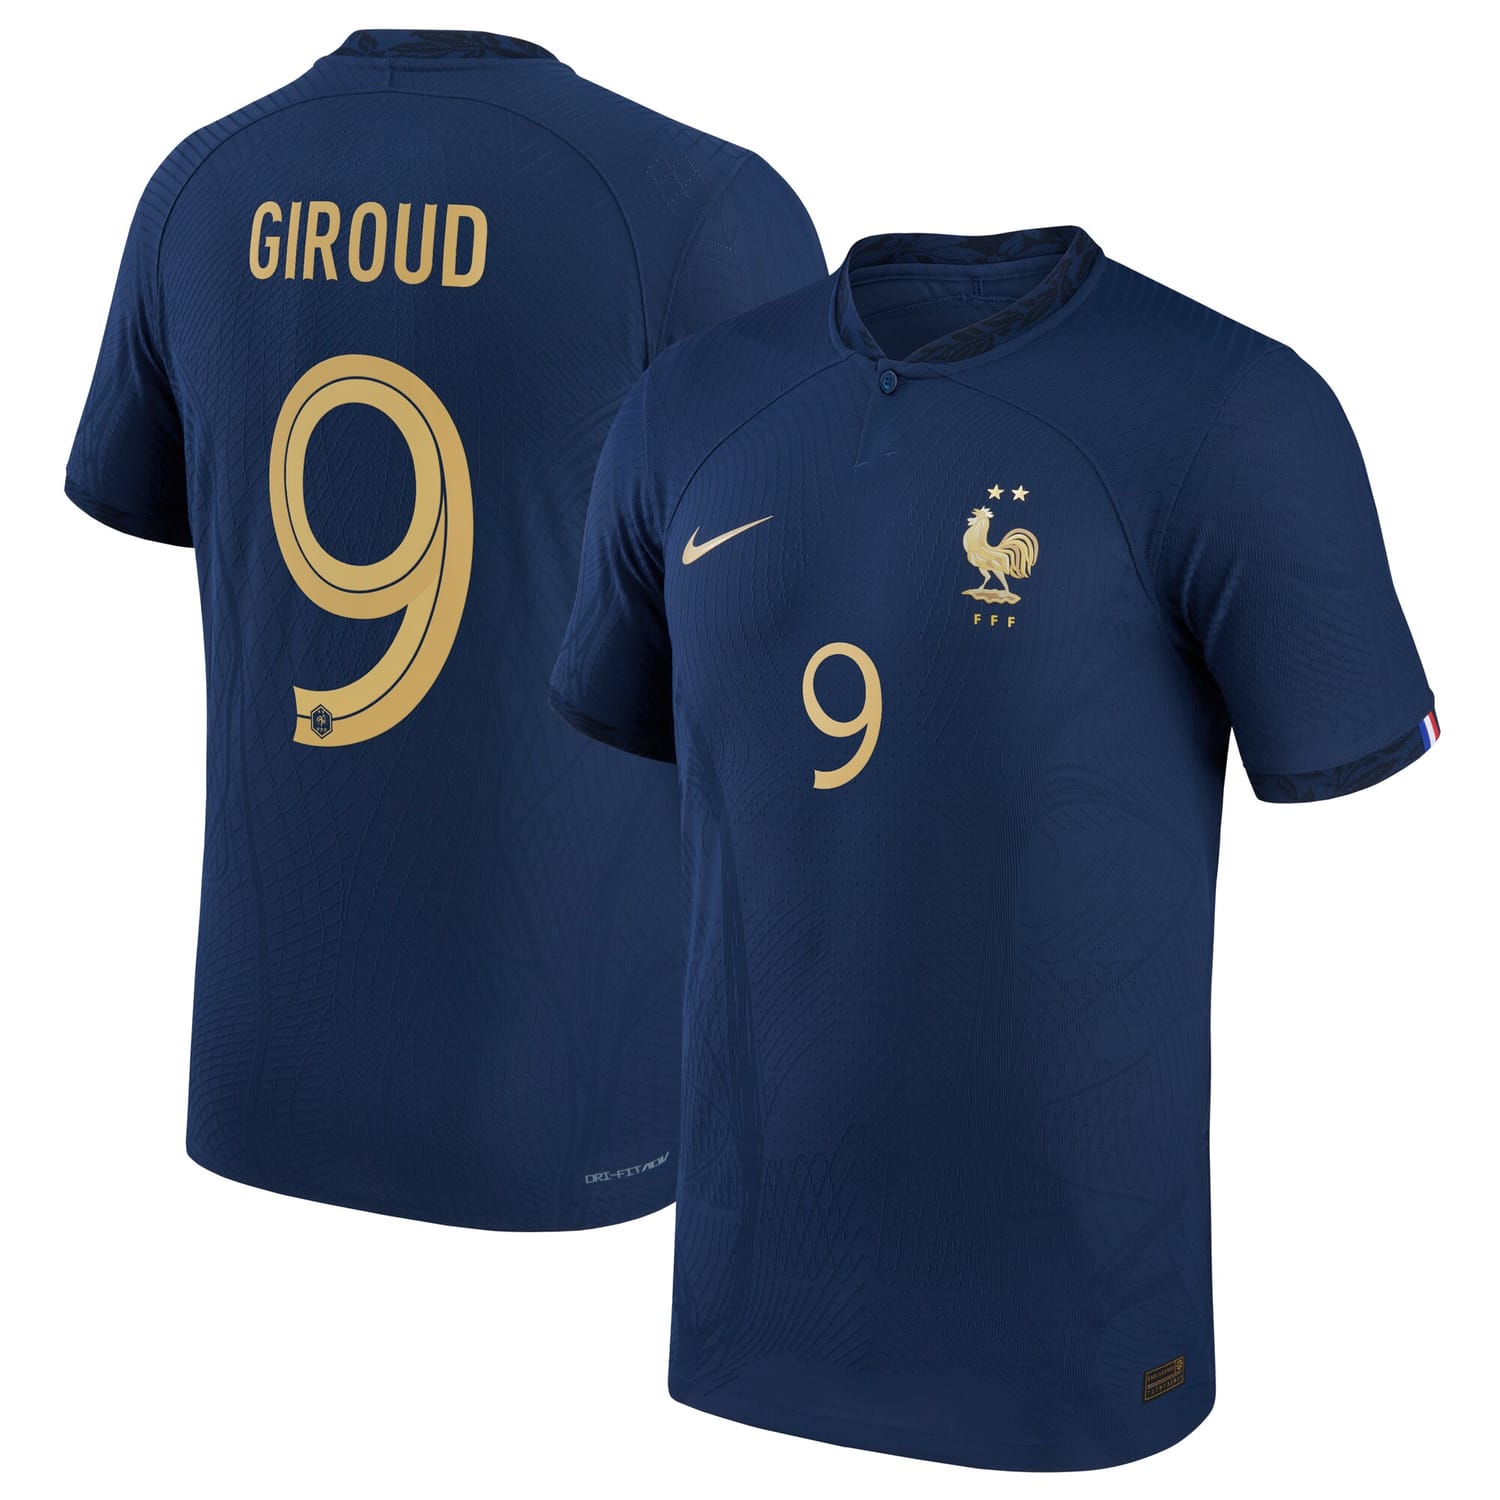 France National Team Home Authentic Jersey Shirt 2022 player Olivier Giroud 9 printing for Men